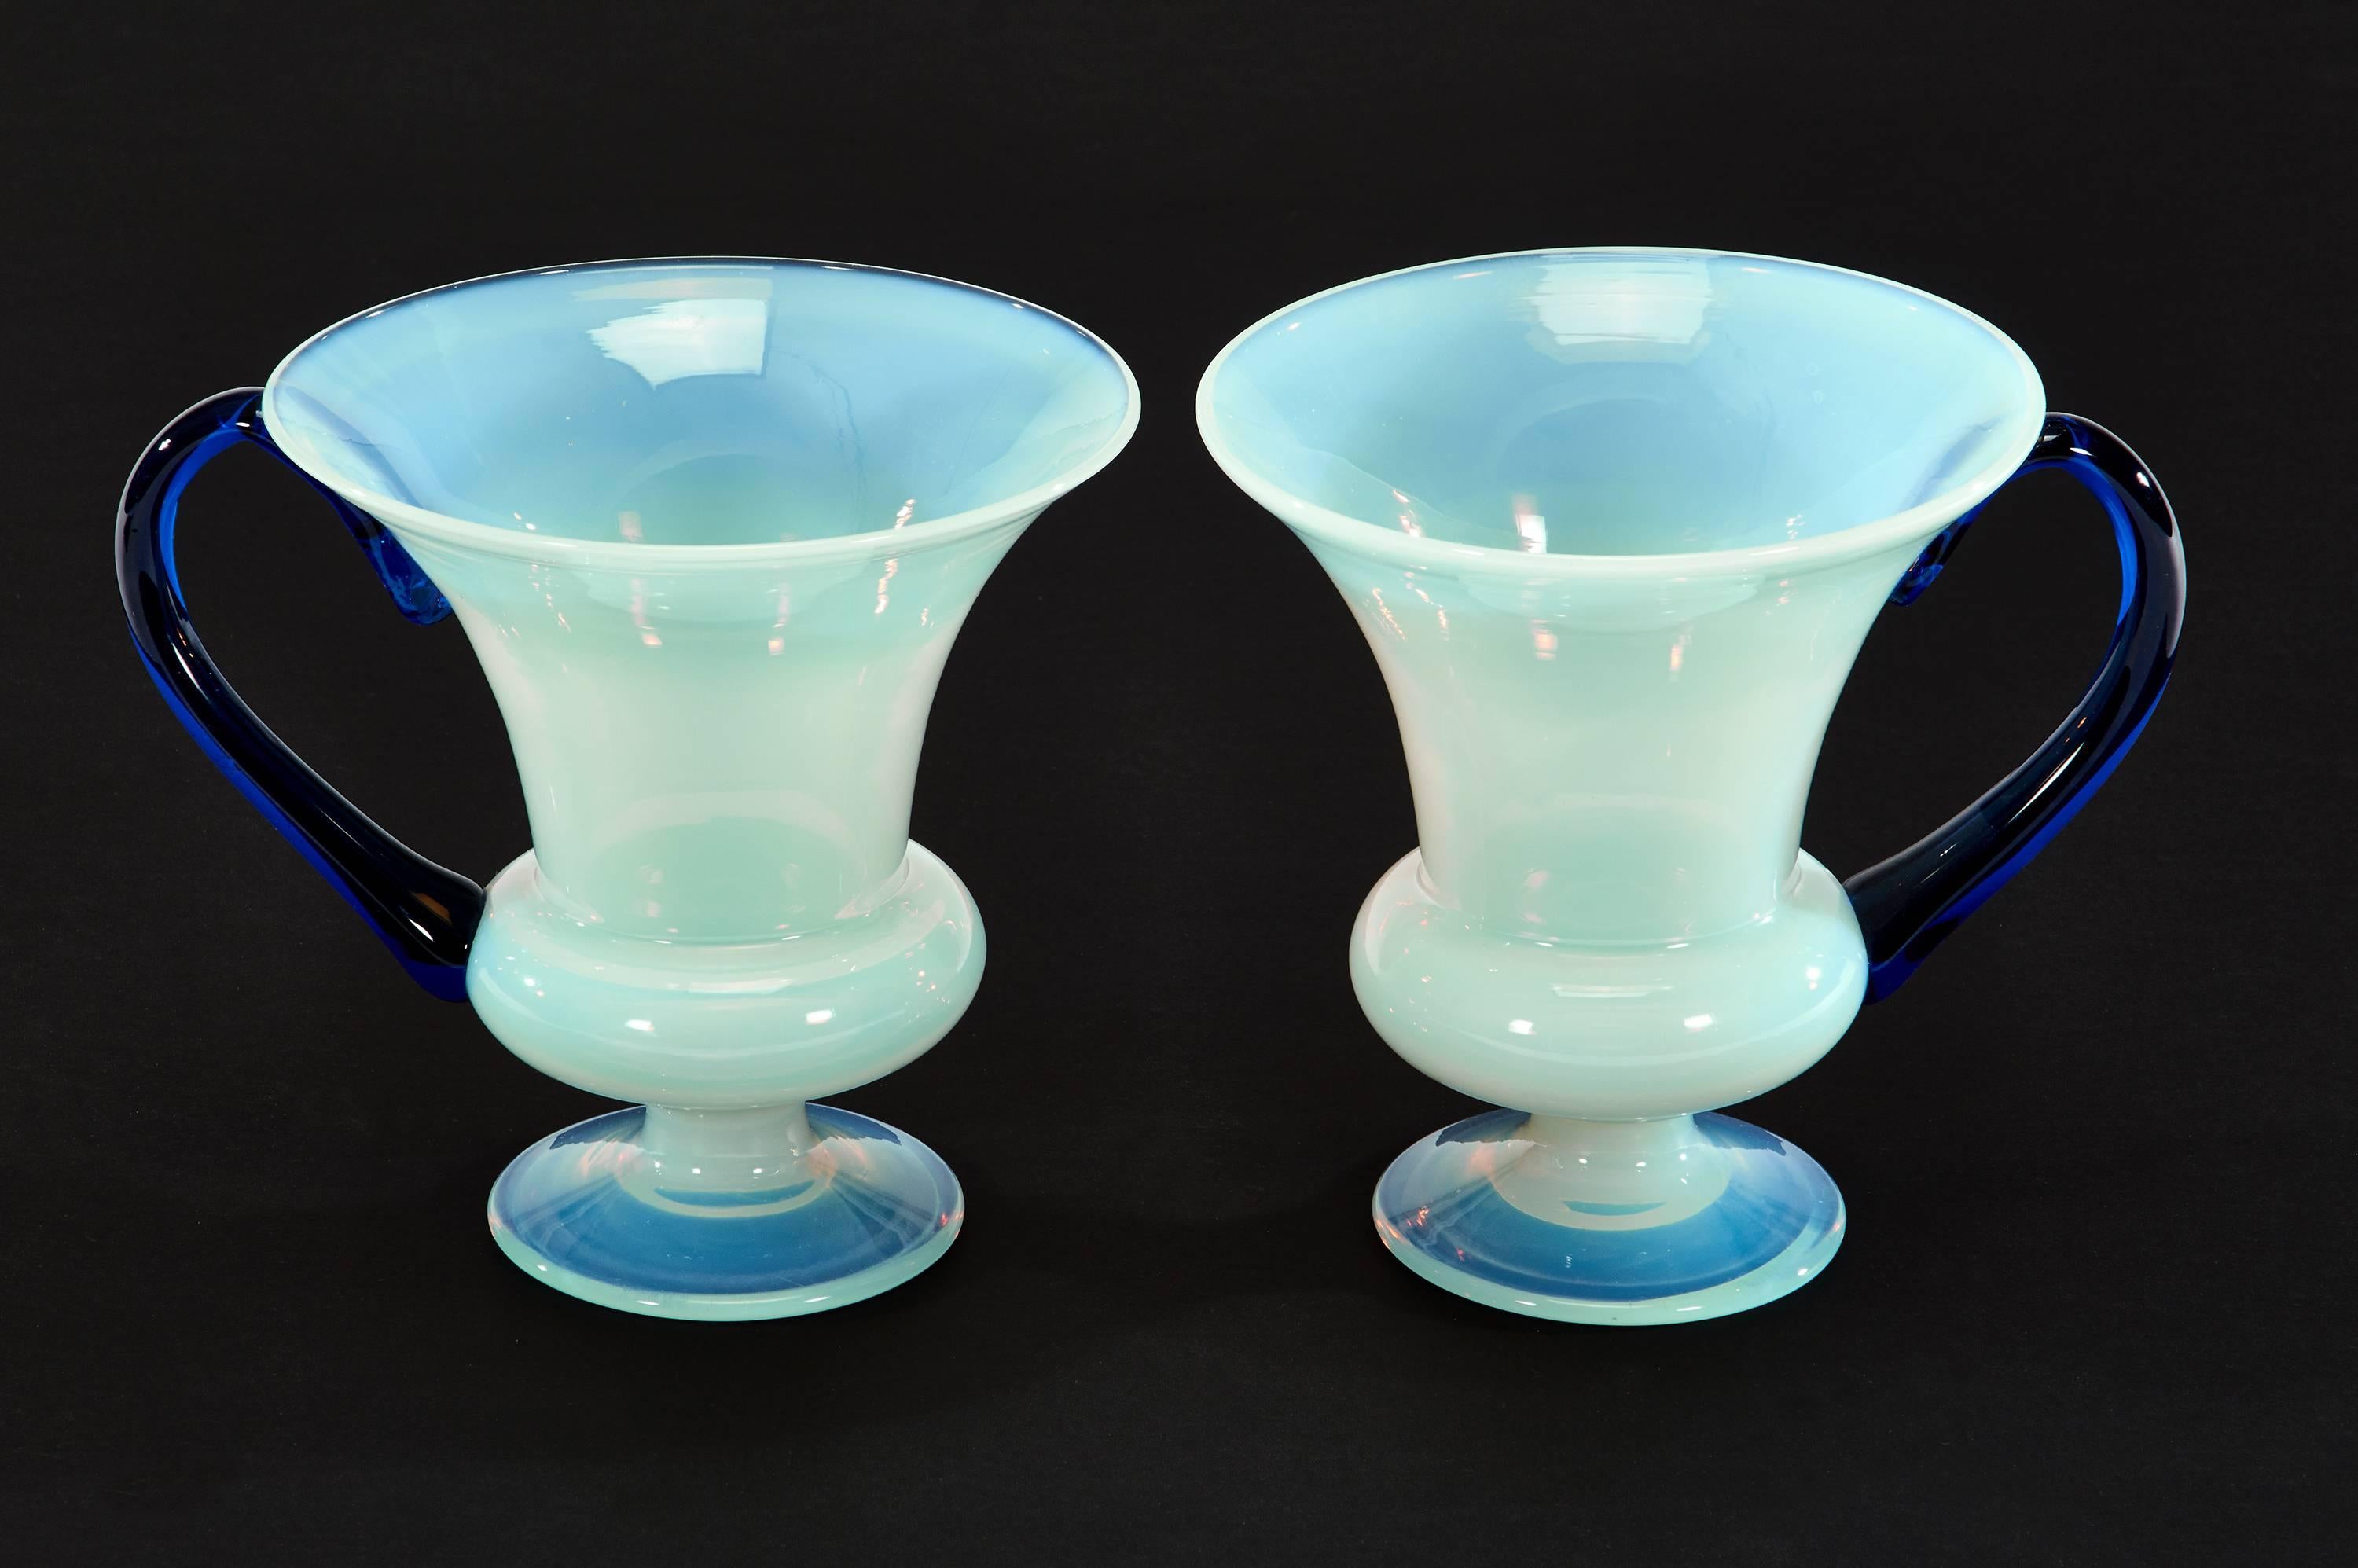 This is an unusual pair of Fry handblown vases in the opalescent glass that was described as 